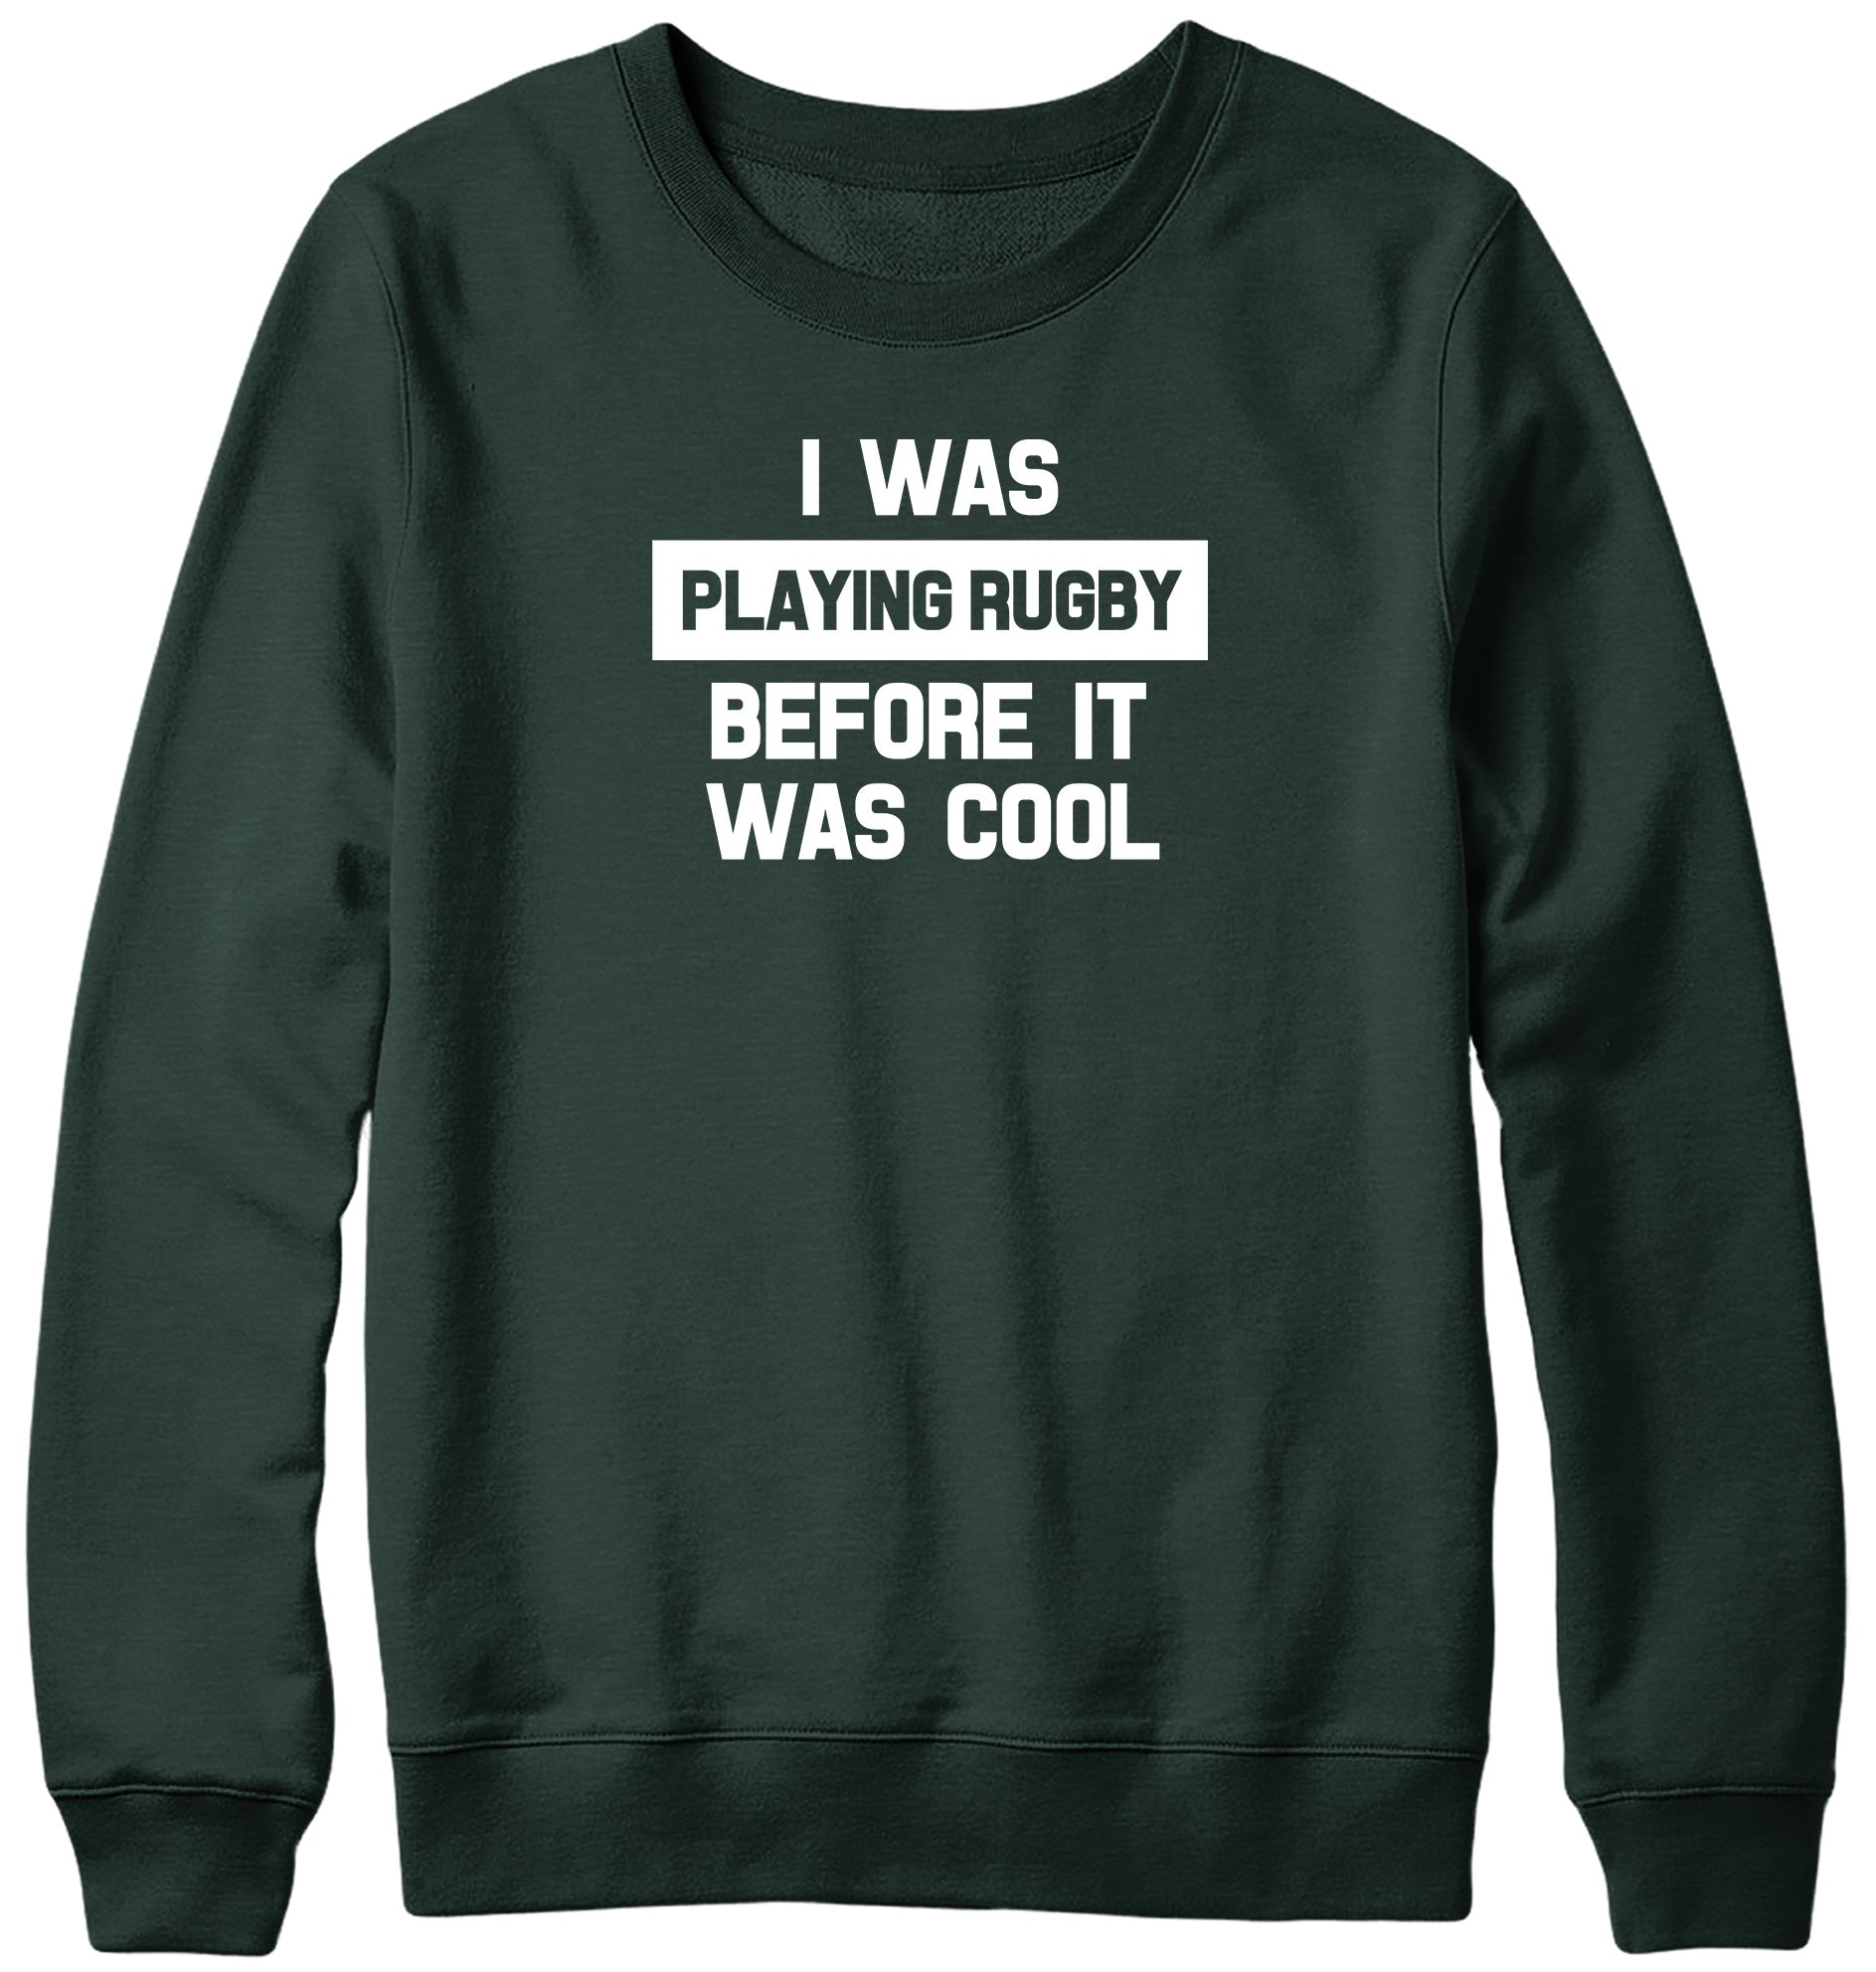 I WAS PLAYING RUGBY BEFORE IT WAS COOL WOMENS LADIES MENS UNISEX SWEATSHIRT